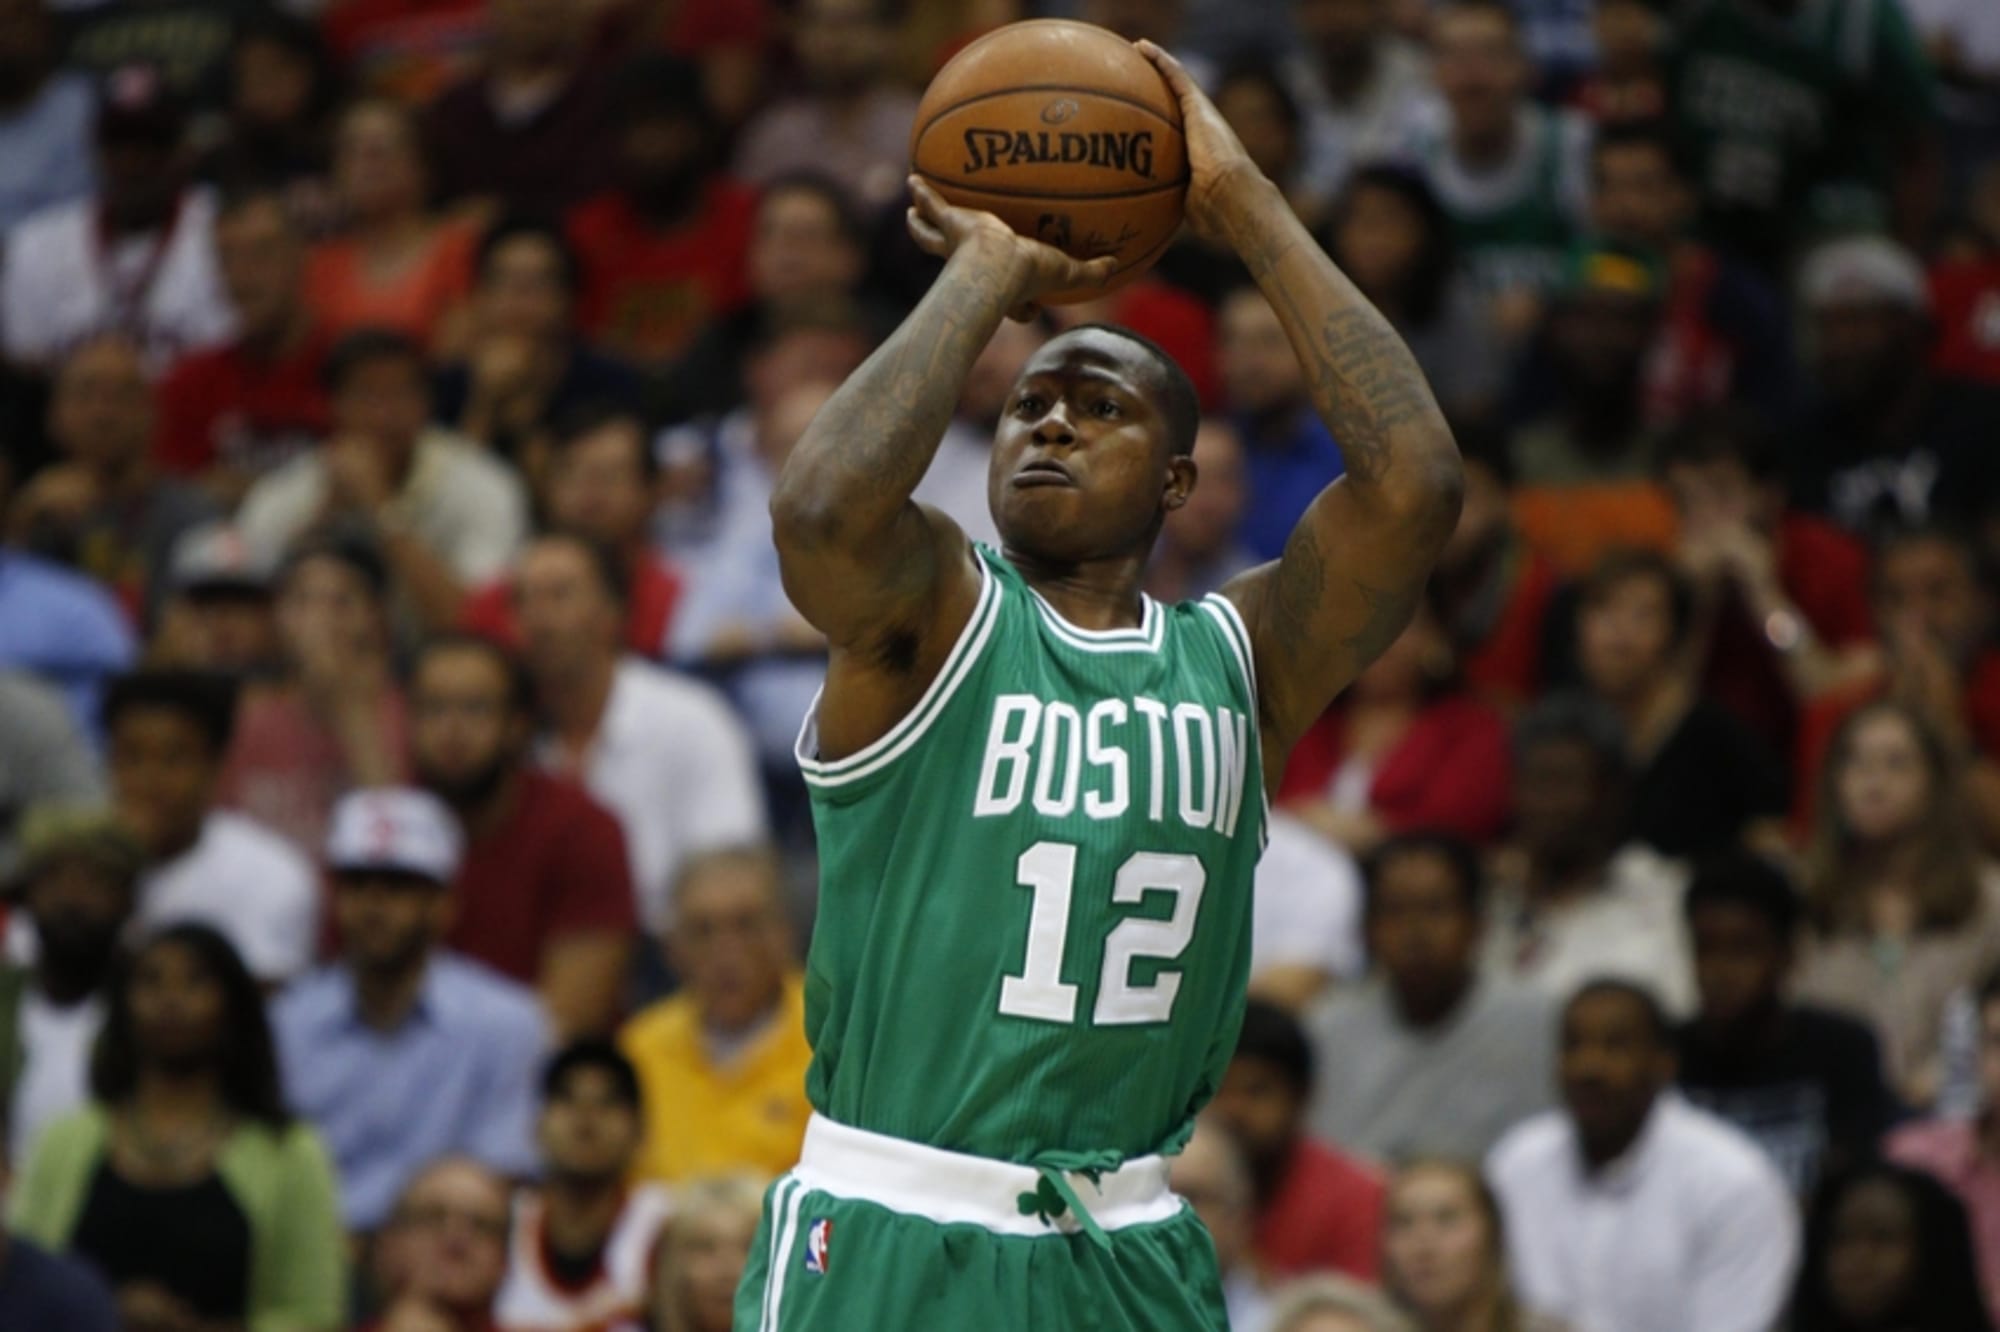 Boston Celtics: Why the Maine Red Claws should feel the pressure